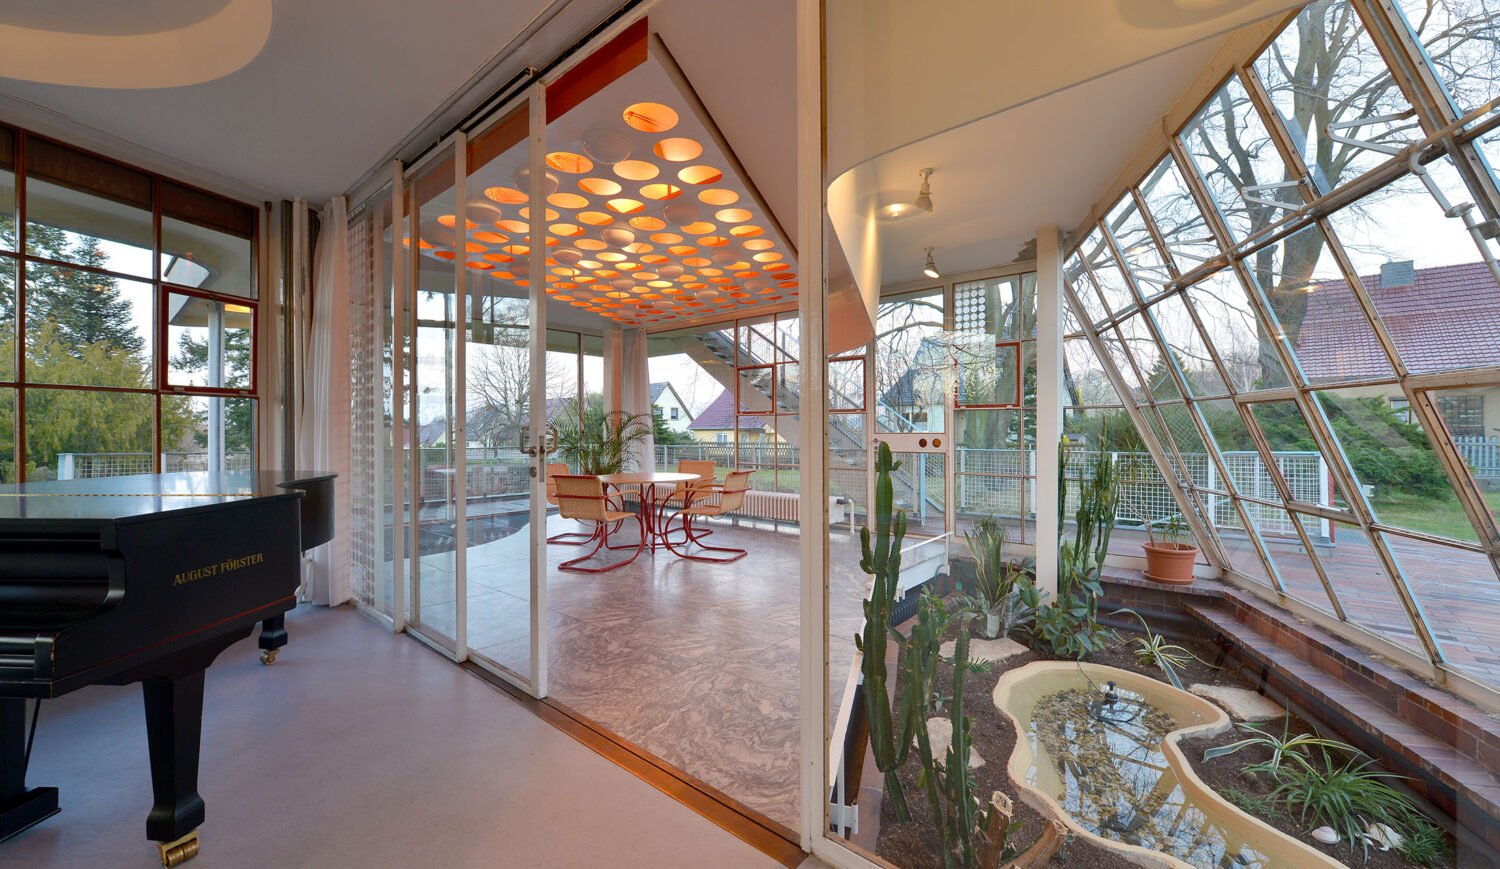 The elongated living room on the first floor opens to the east into a winter garden